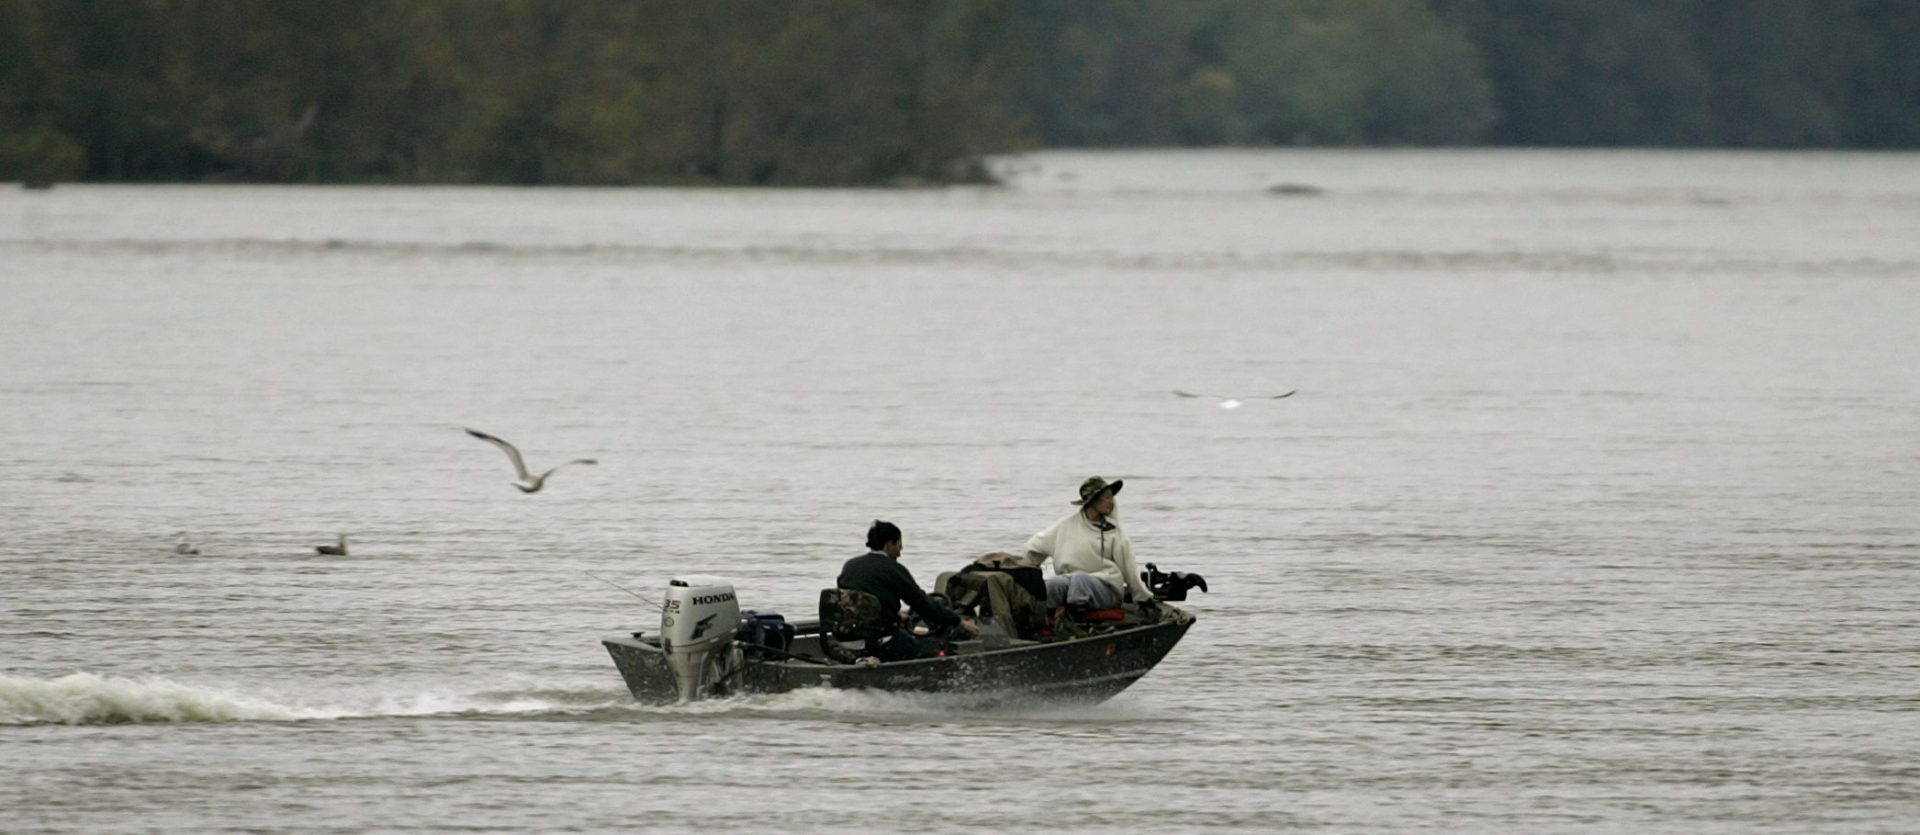 Fisherman on the Susquehanna River. It supplies half the freshwater flowing into the Chesapeake Bay.